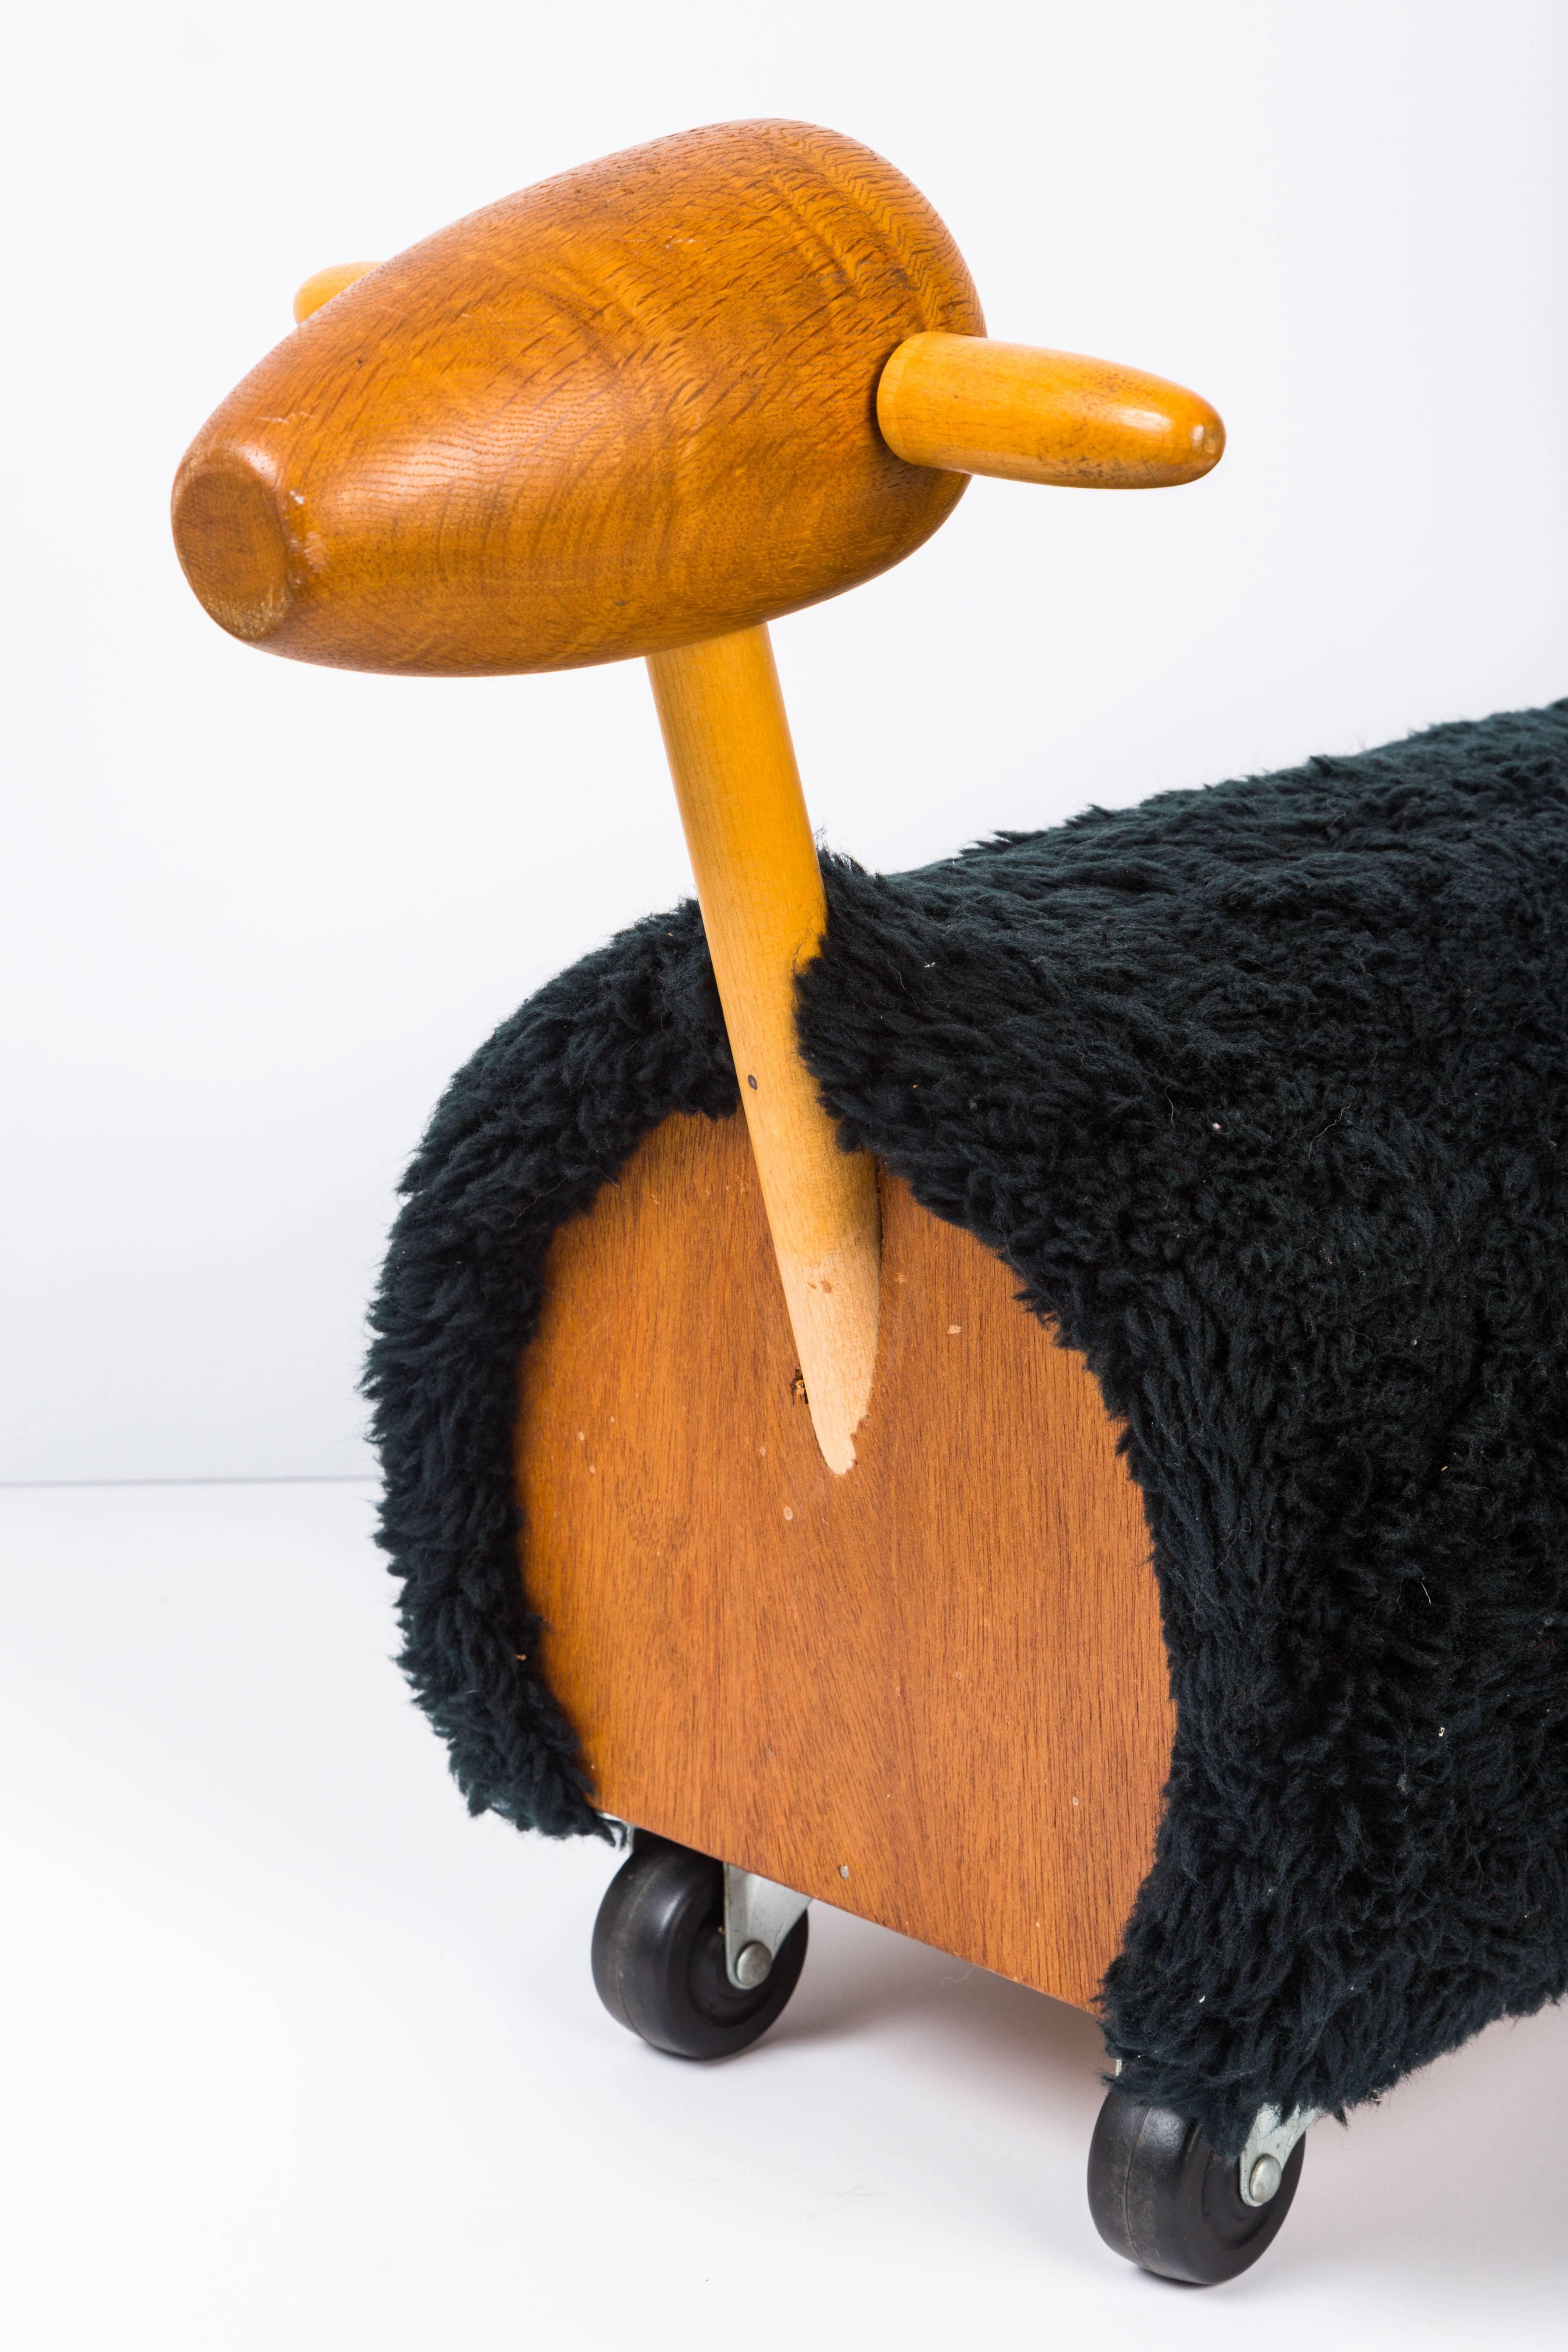 Mid-20th Century Wood and Wool Sheep by Creative Playthings